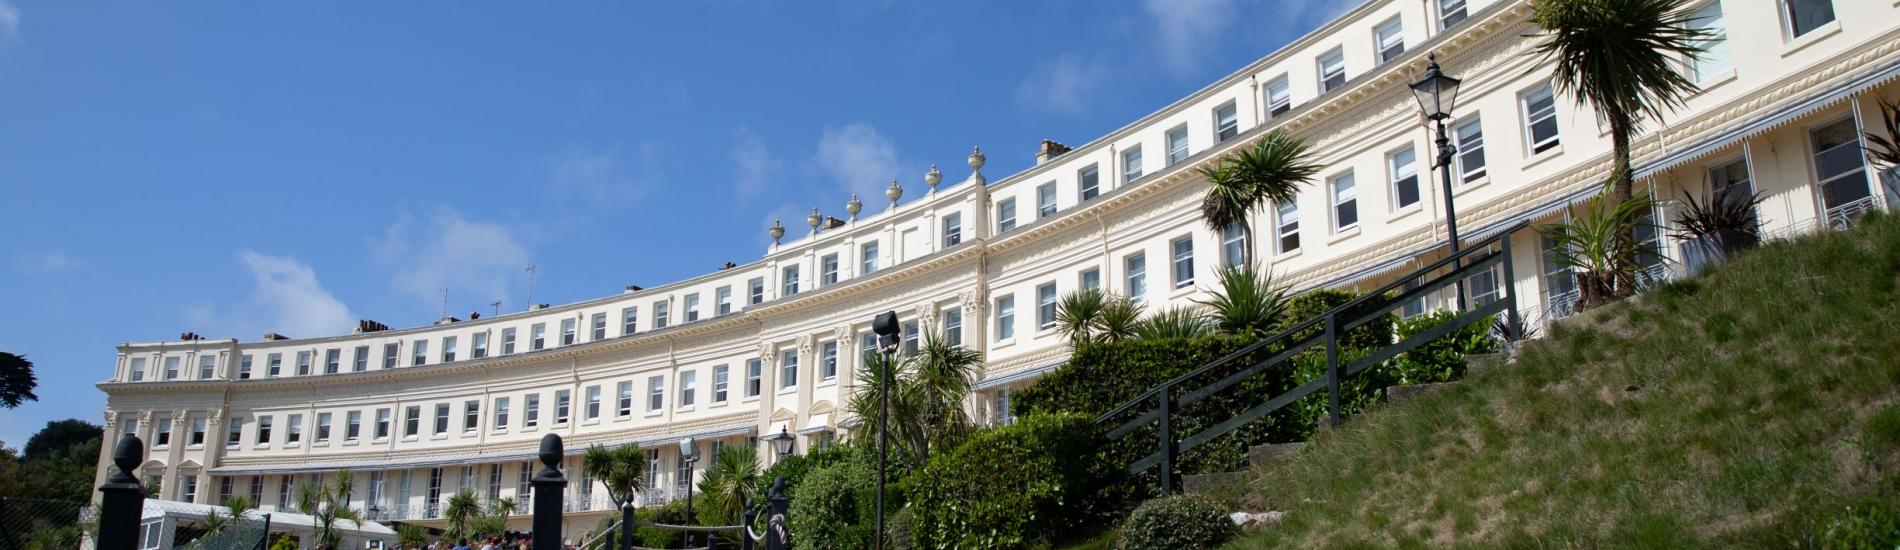 Front of the Osborne Hotel, Torquay showing the Cresent